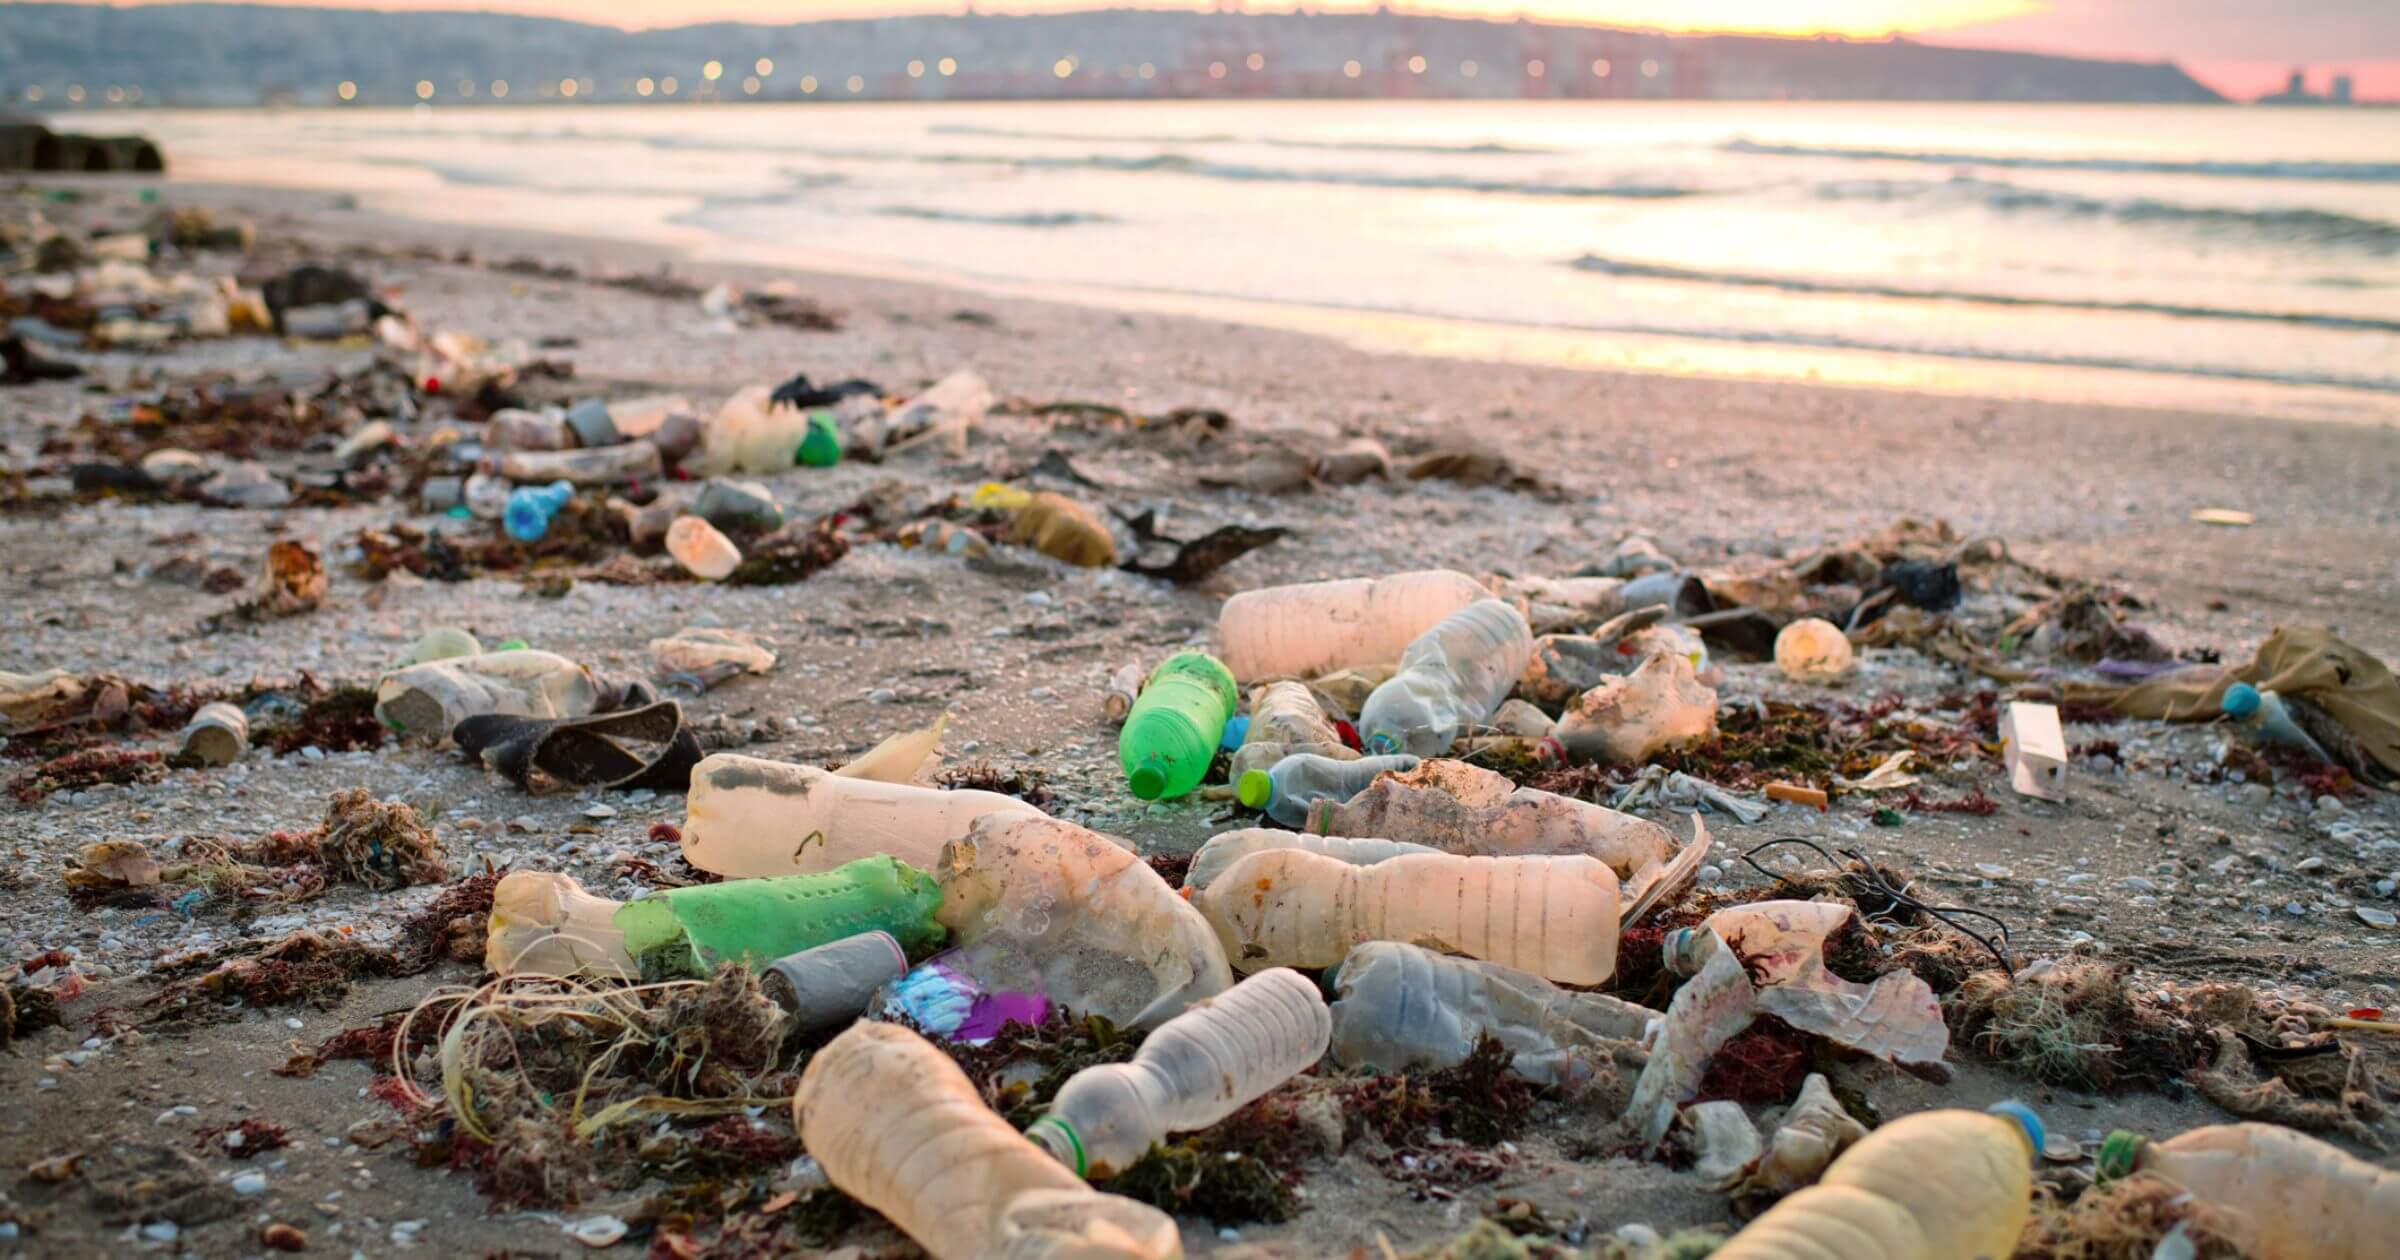 Piles of plastic bottles discarded on a beach with other plastic among seaweed in the background